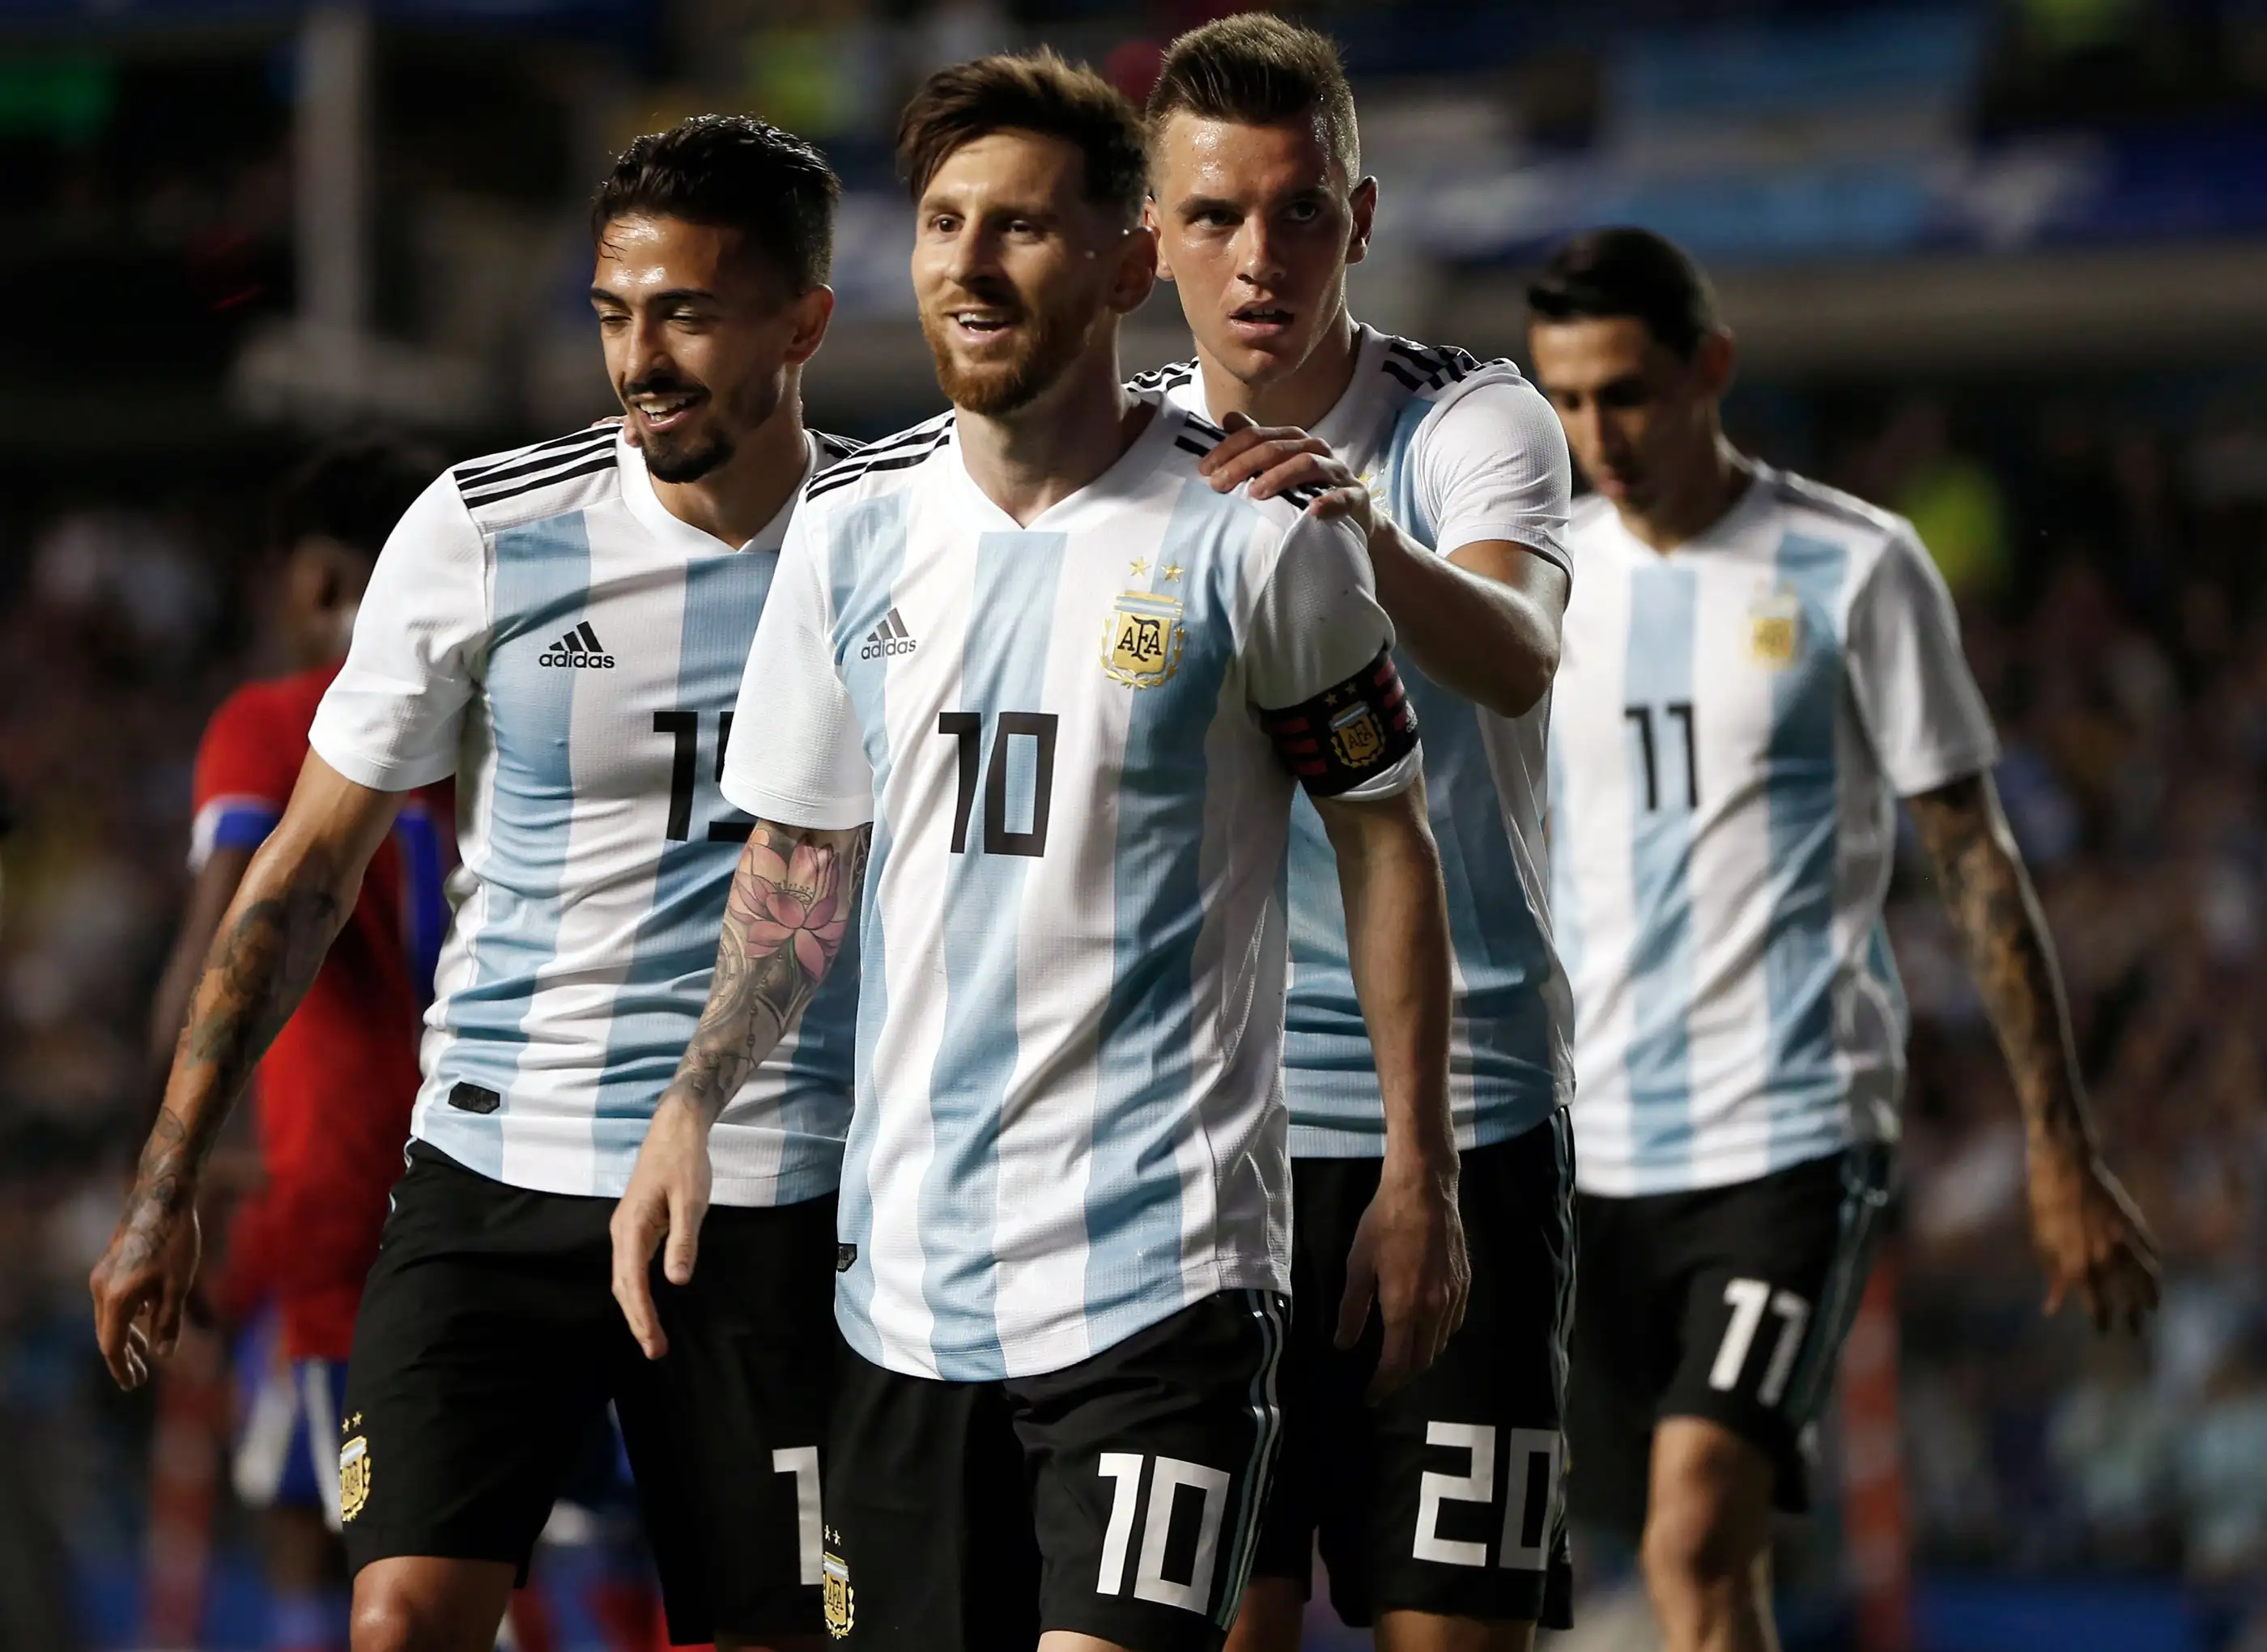 Argentina's Manuel Lanzini, left, Giovanni Lo Celso, second right, and Angel Di Maria, right, congratulate teammate Lionel Messi, second left, after his hat trick during a friendly soccer match between Argentina and Haiti at the Bombonera stadium in Buenos Aires, Argentina, May 29, 2018.